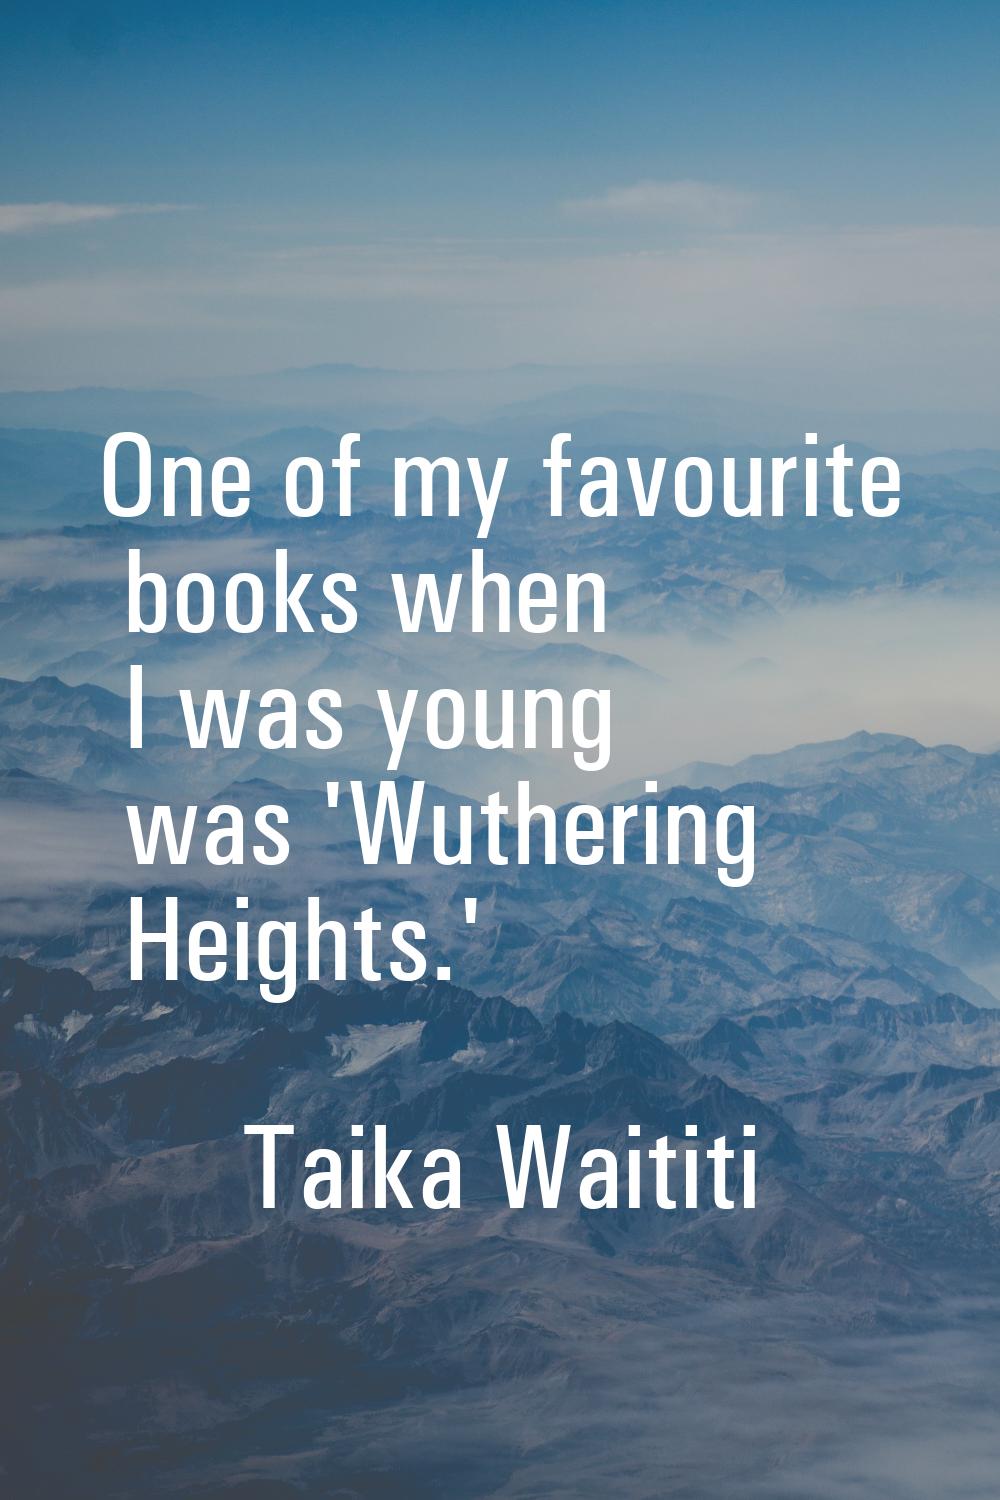 One of my favourite books when I was young was 'Wuthering Heights.'